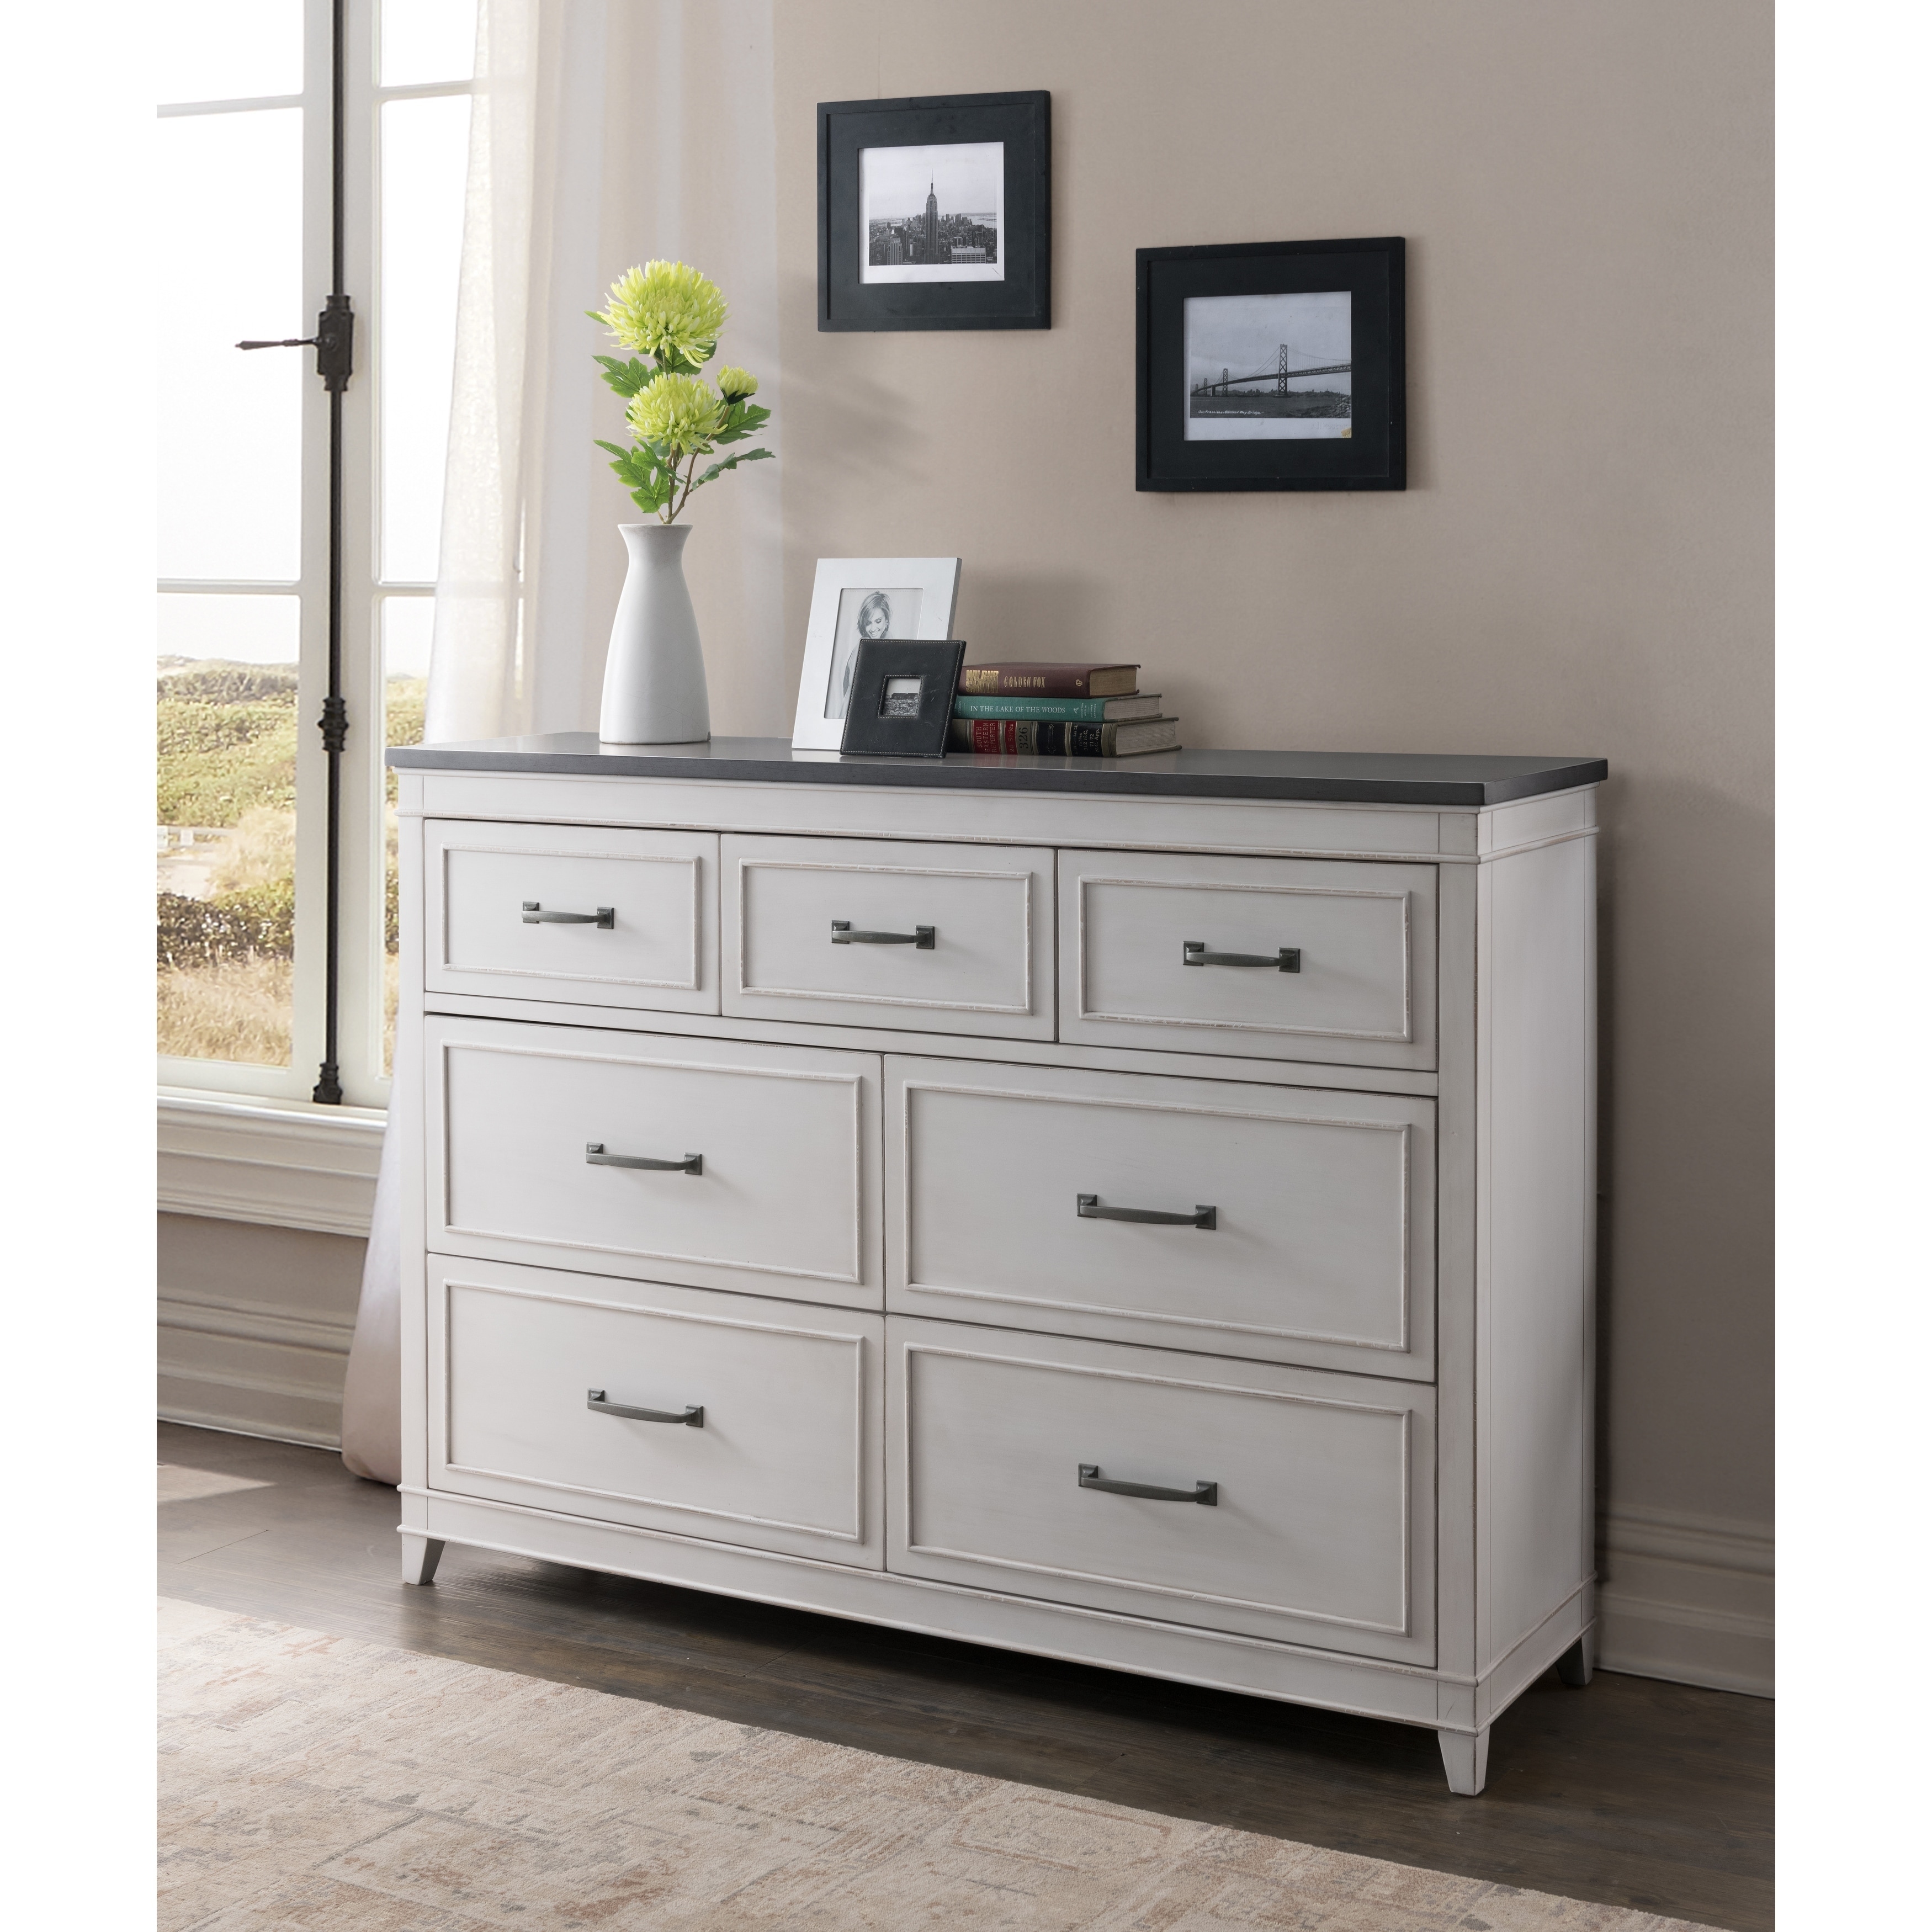 The Gray Barn Happy Horse White And Grey 7 Drawer Dresser On Sale Overstock 28665001